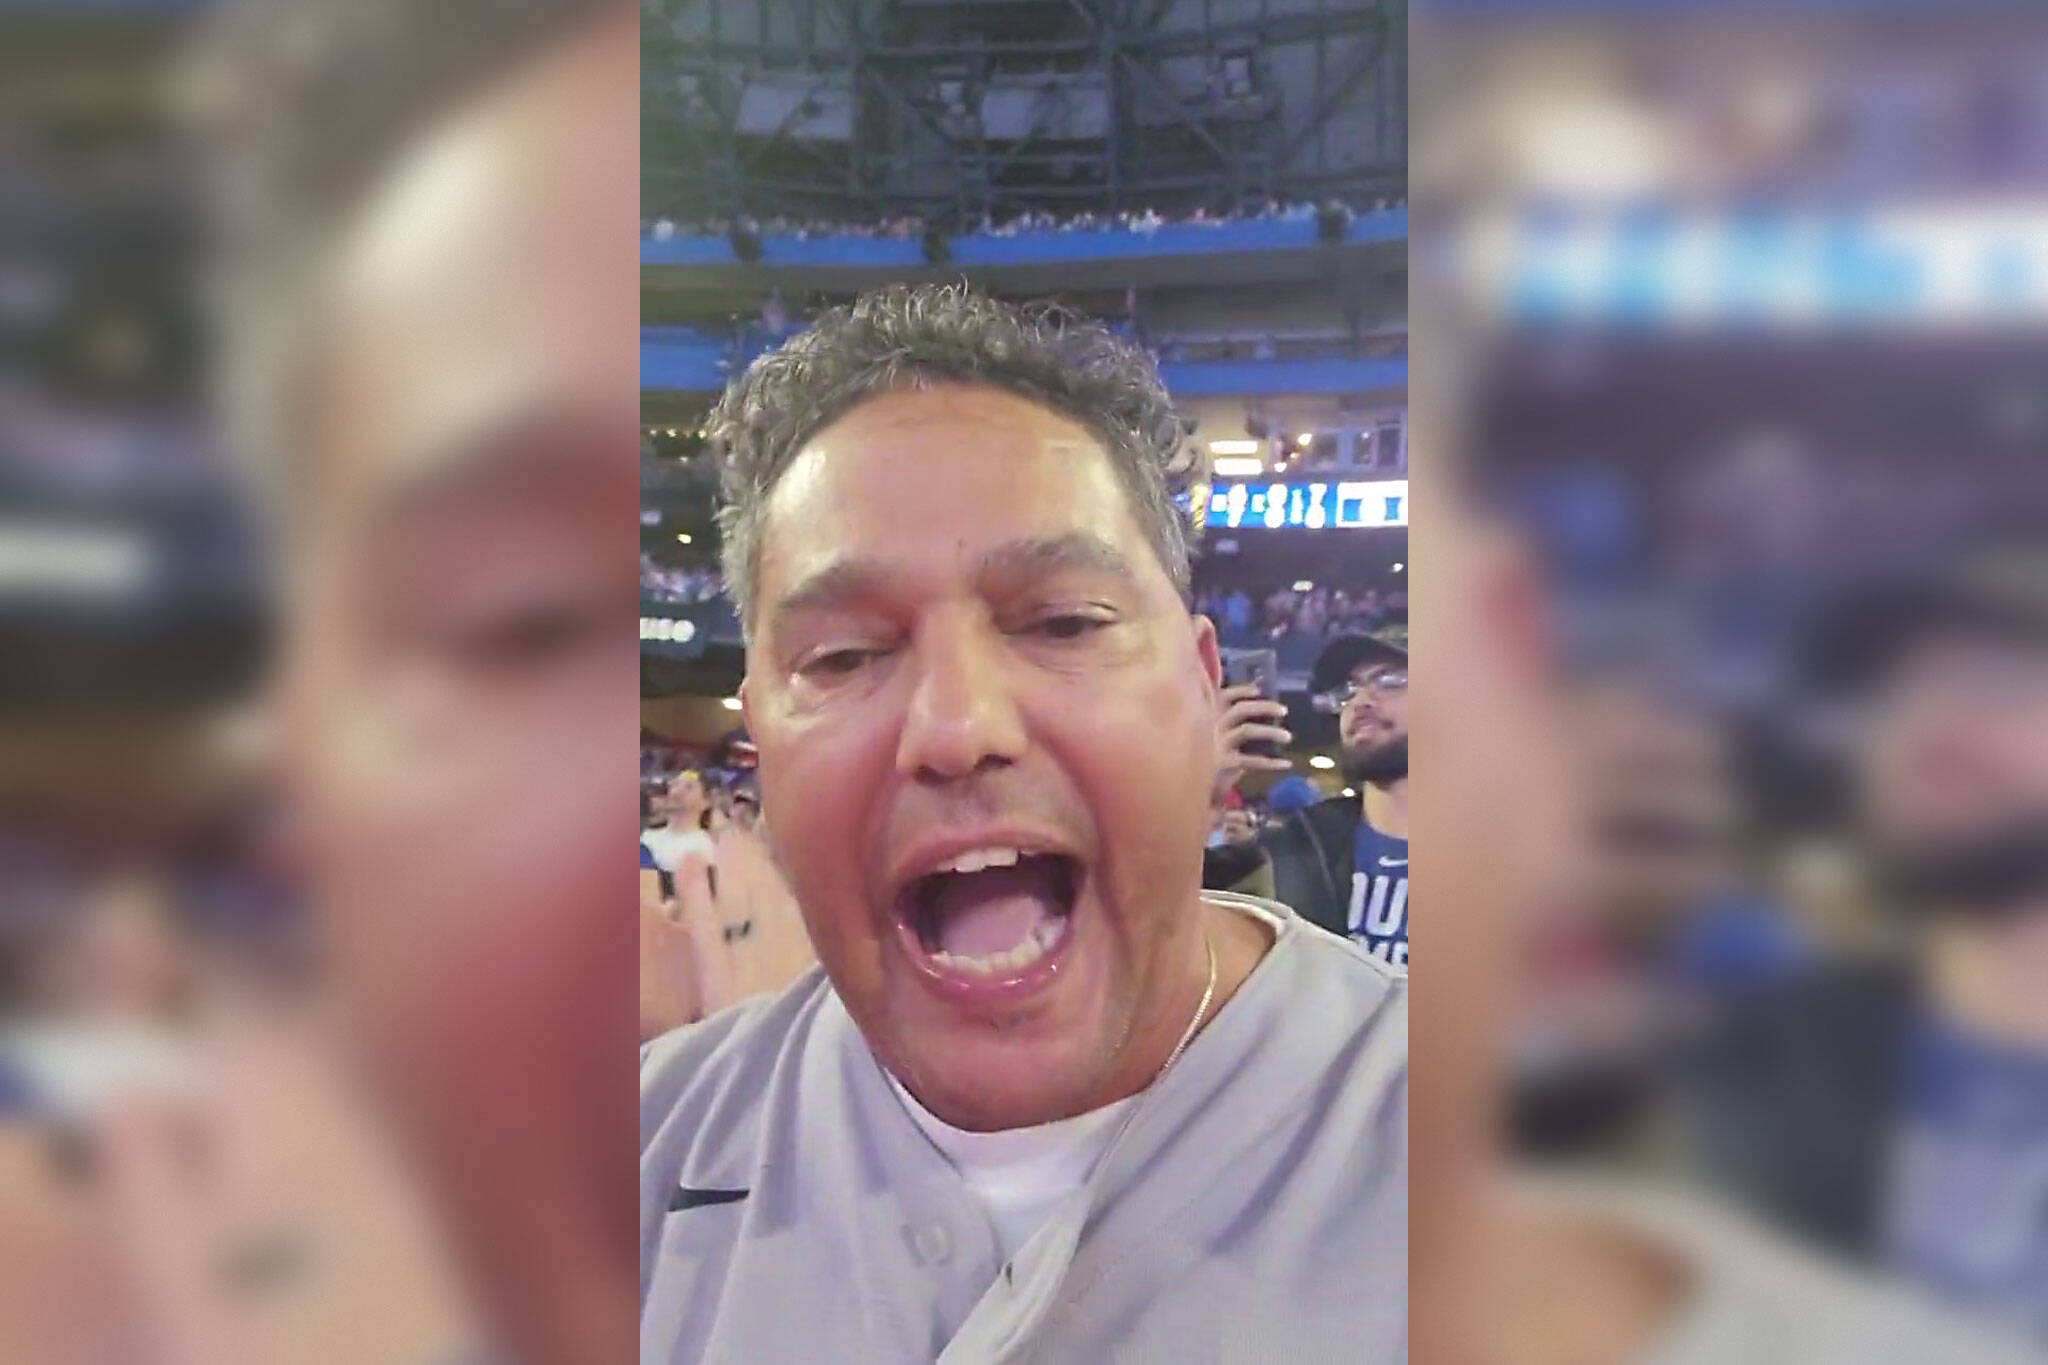 Yankees fan goes viral for completely losing it at Toronto Blue Jays game